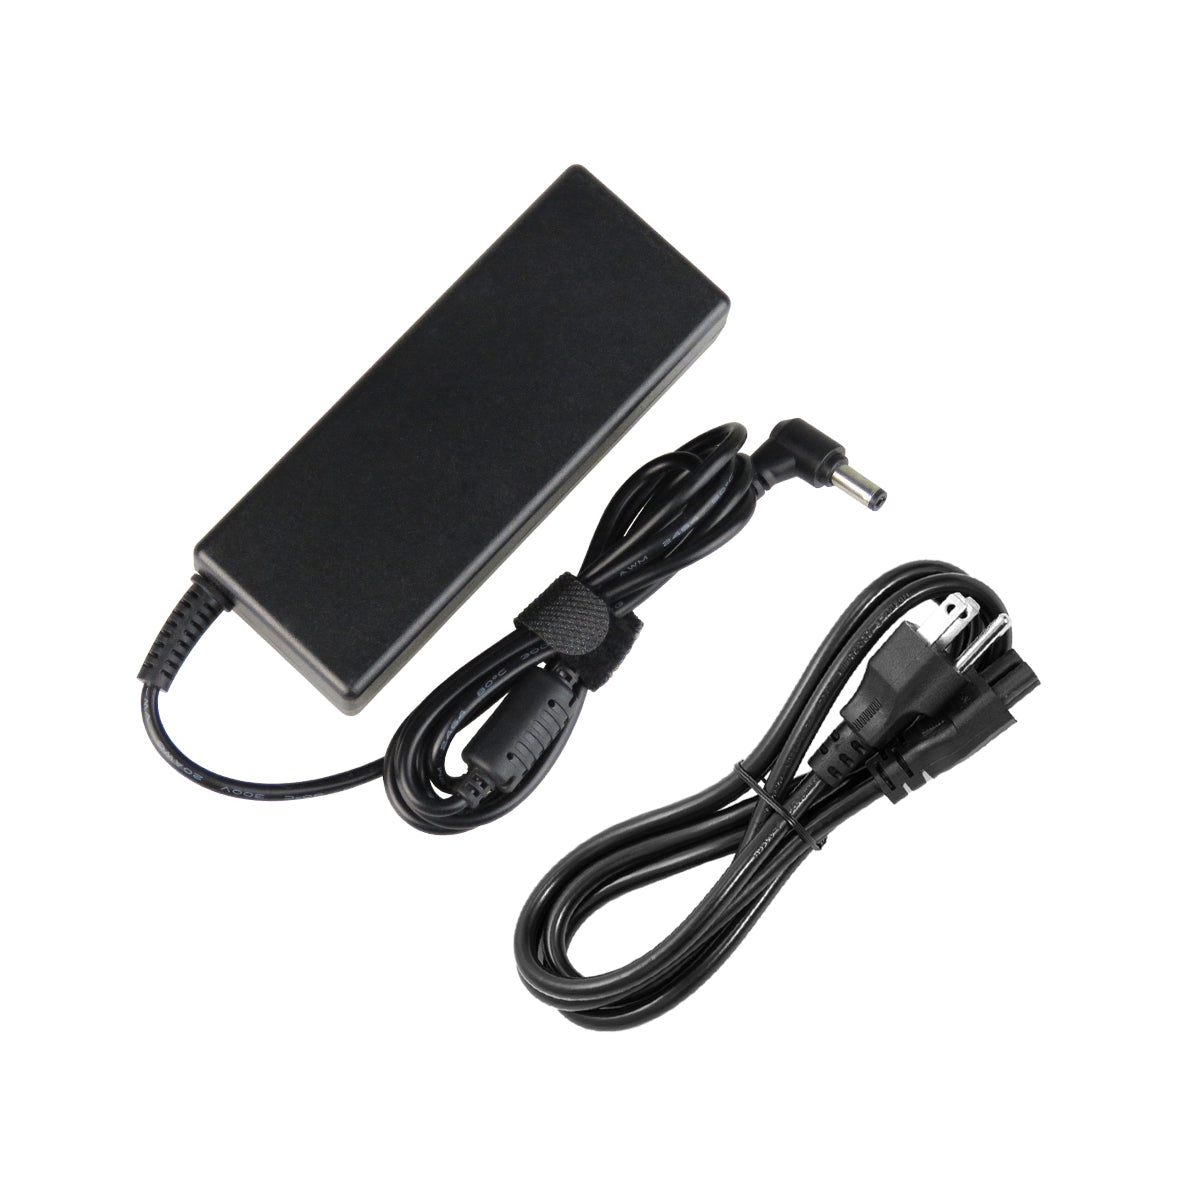 AC Adapter Charger for ASUS ul80jt Series Notebook.